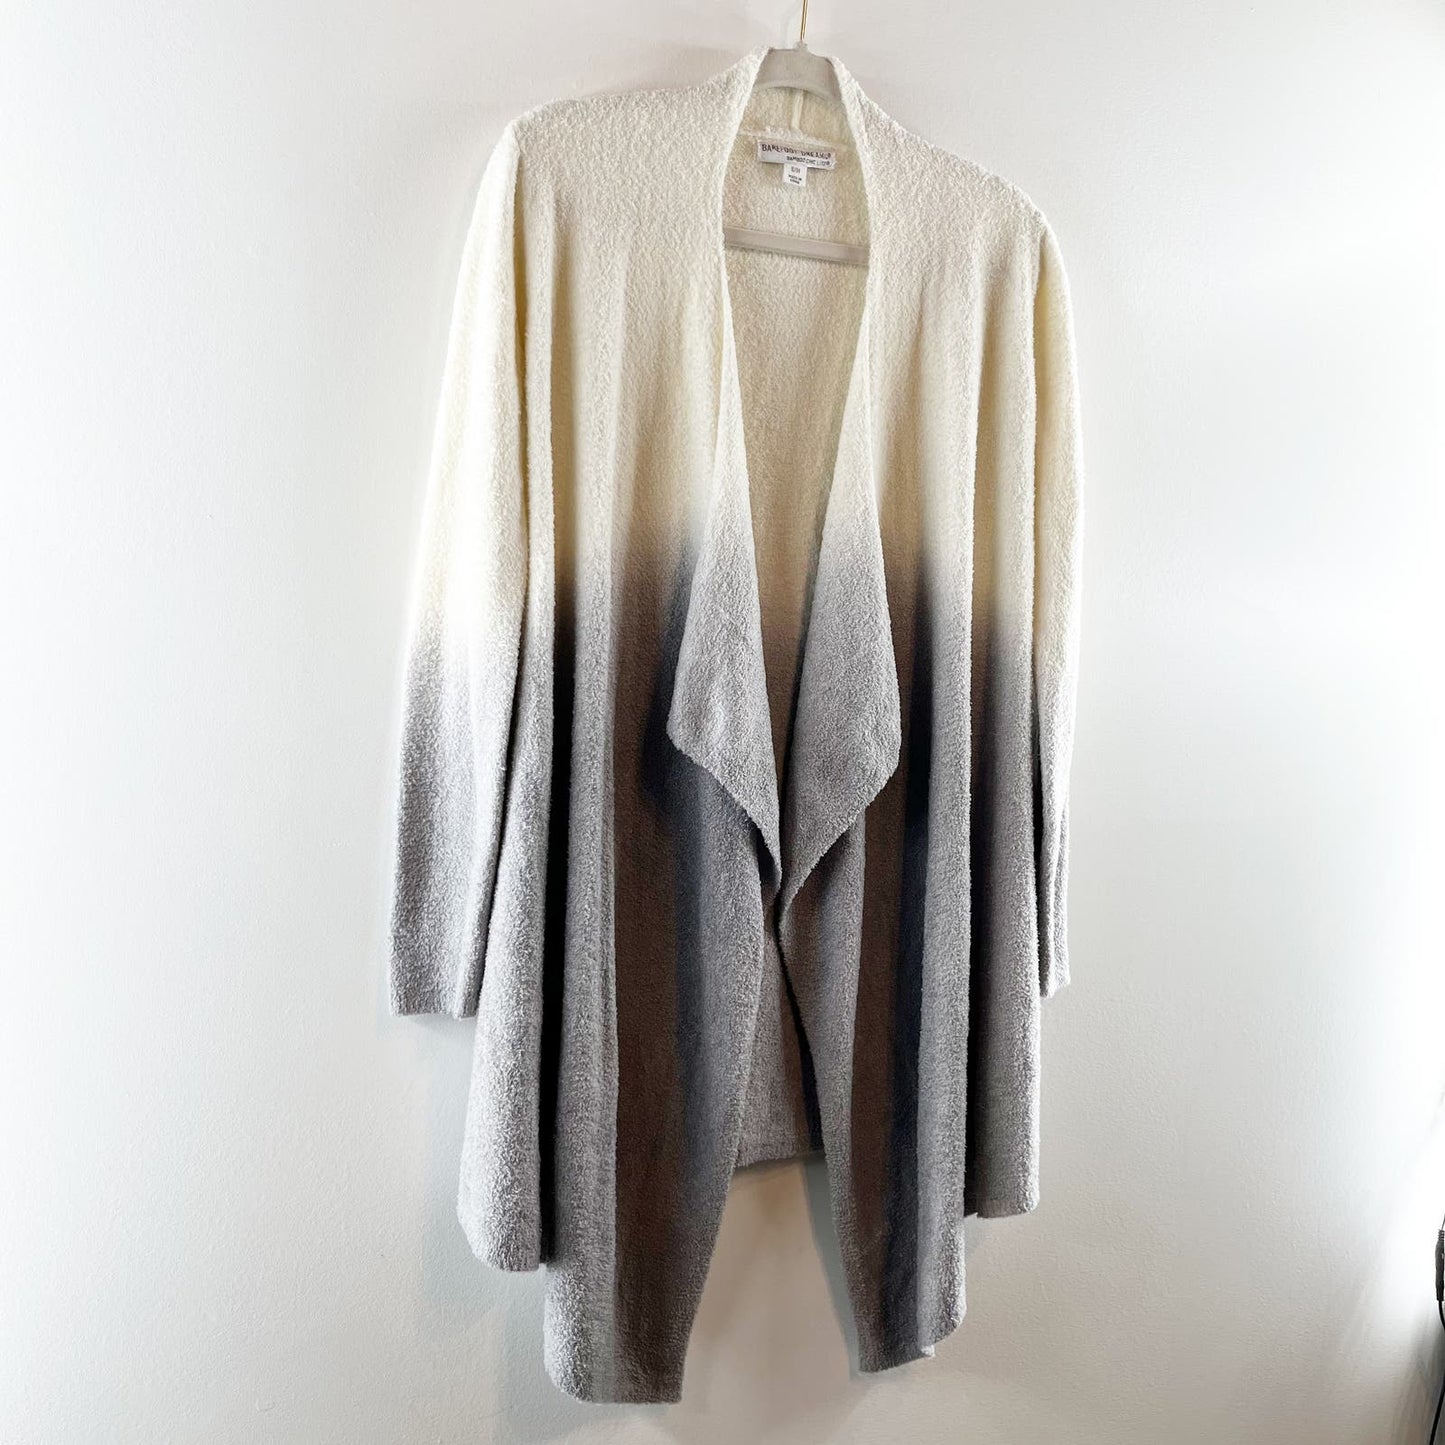 Barefoot Dreams Bamboo Chic Calypso Knit Cardigan Wrap Sweater Ombre White Gray